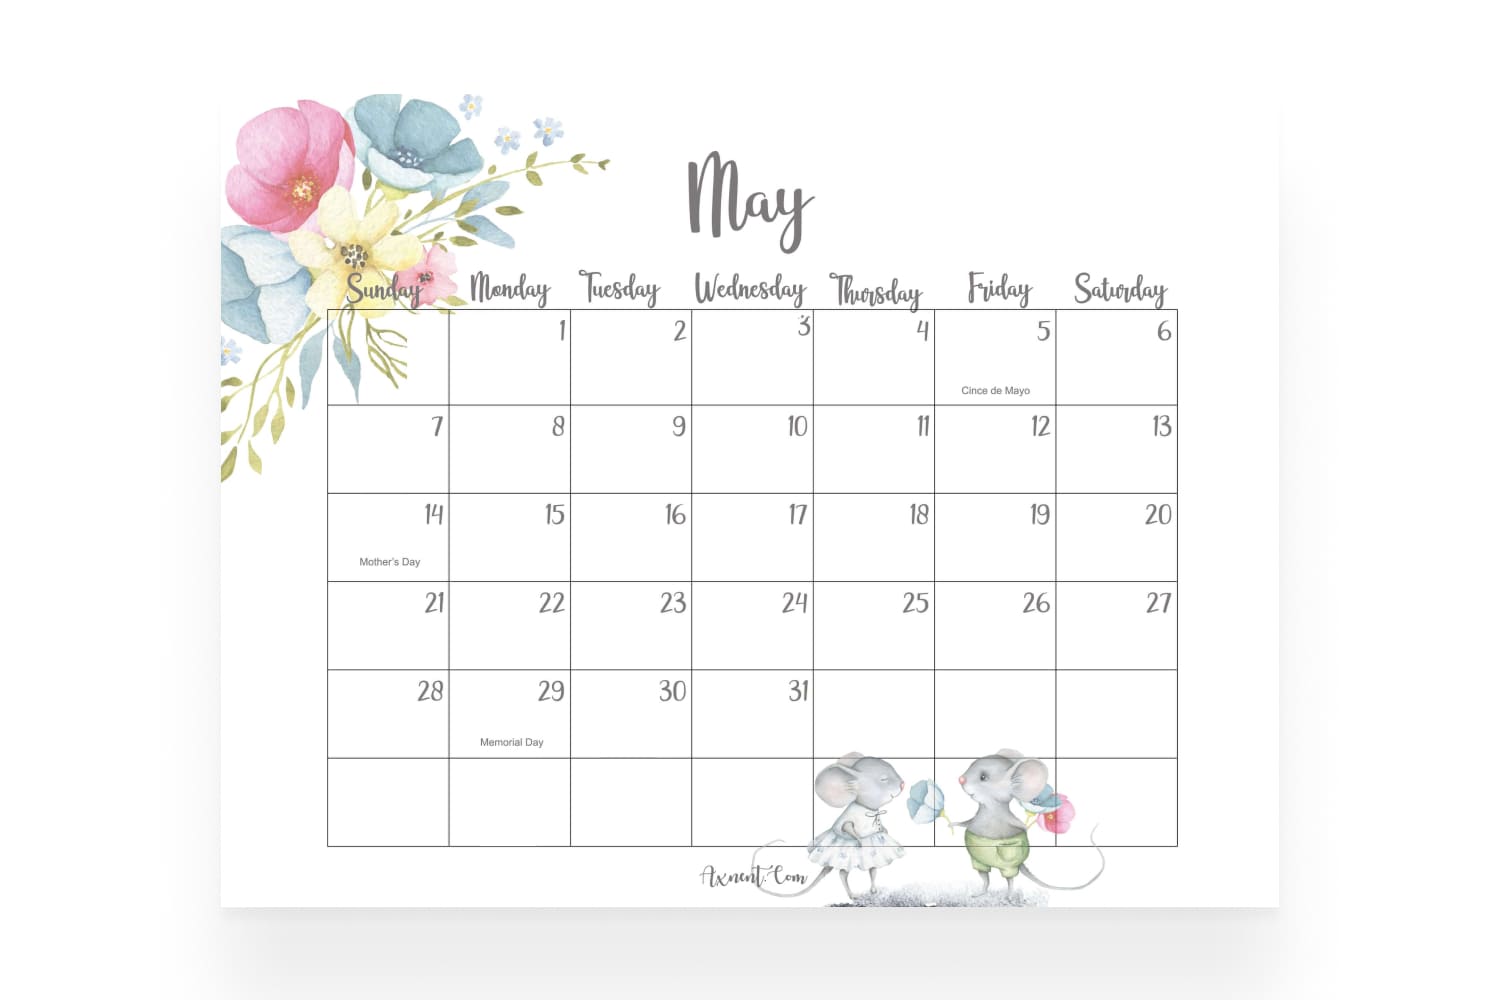 Calendar with a adorable mice and colorful flowers and large date boxes with space for notes.